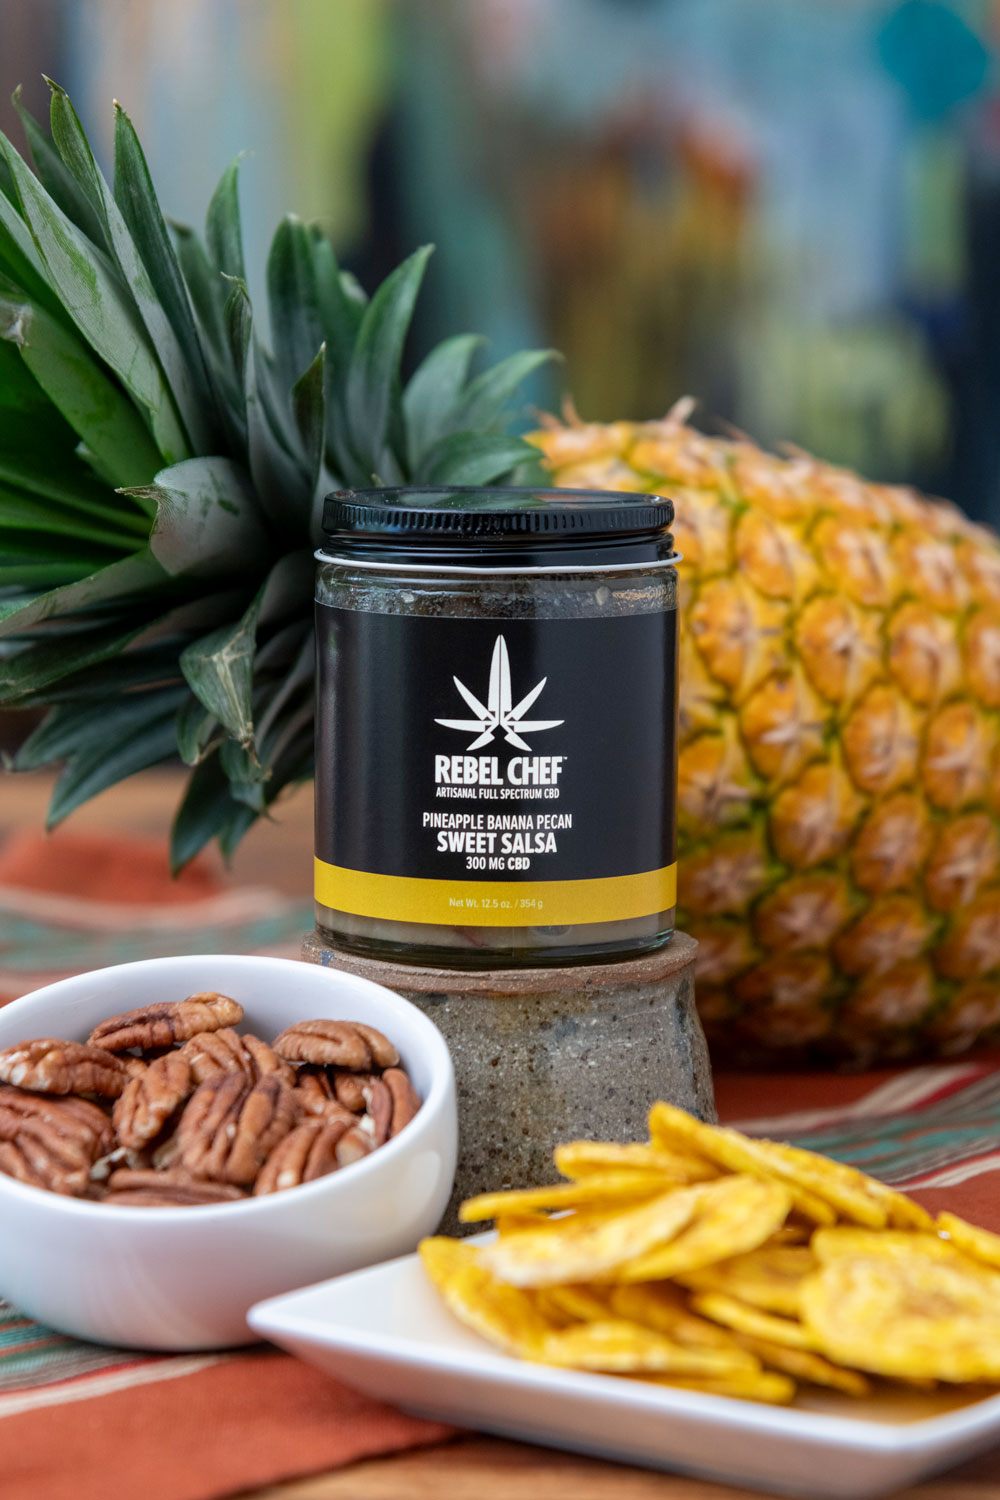 Why Rebel Chef CBD products are all-natural and organic.